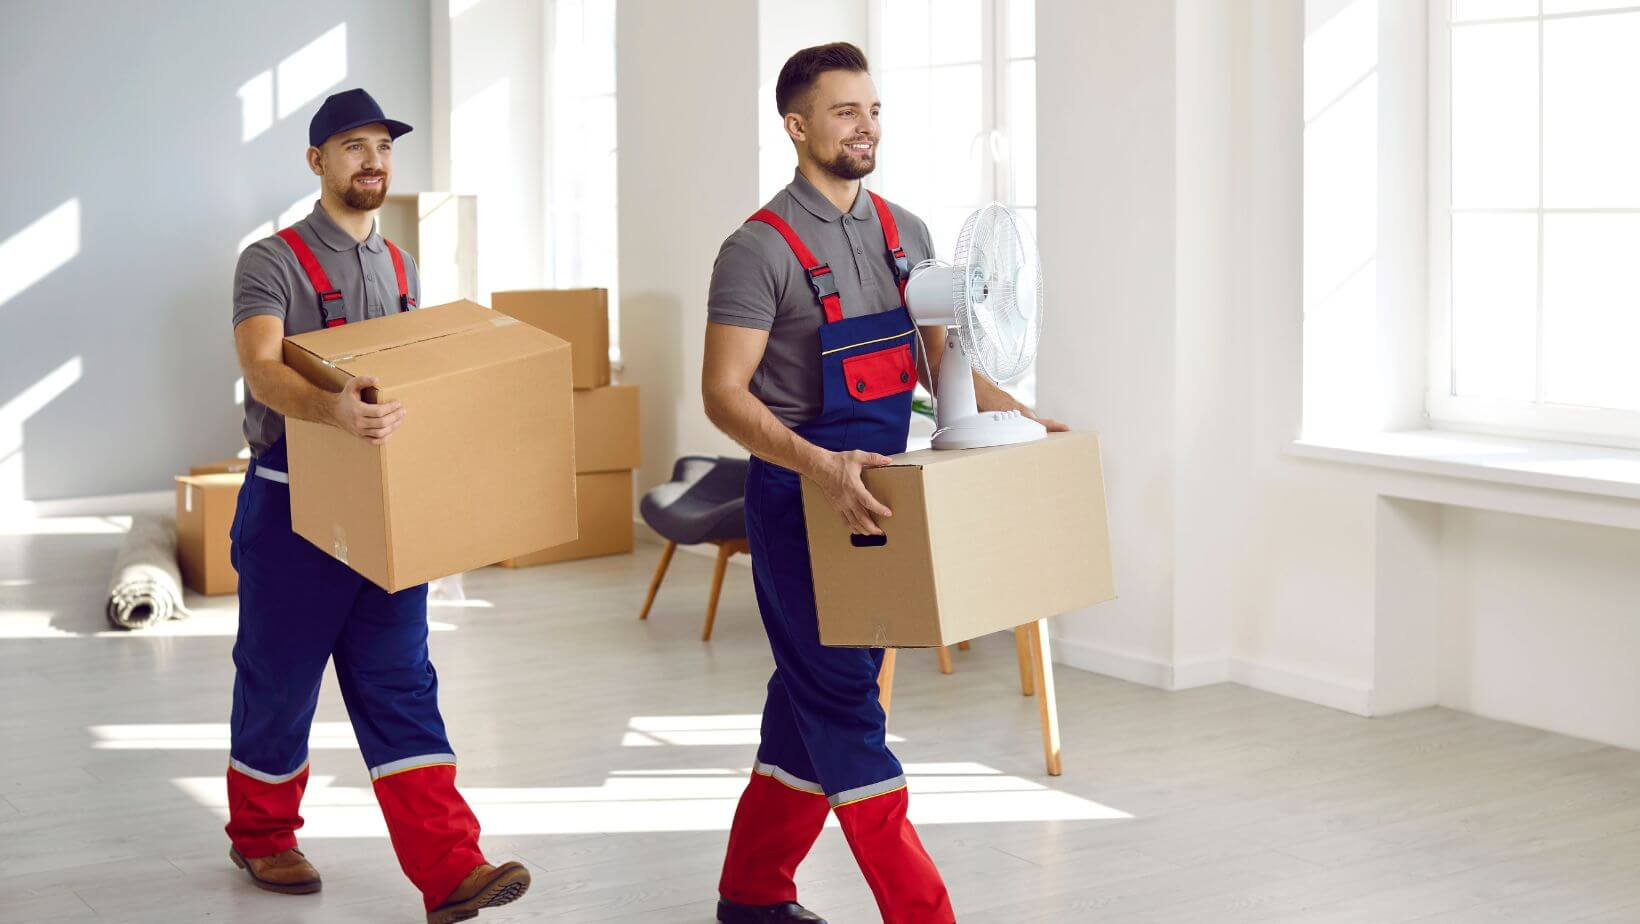 Professional movers carrying boxes in a home.